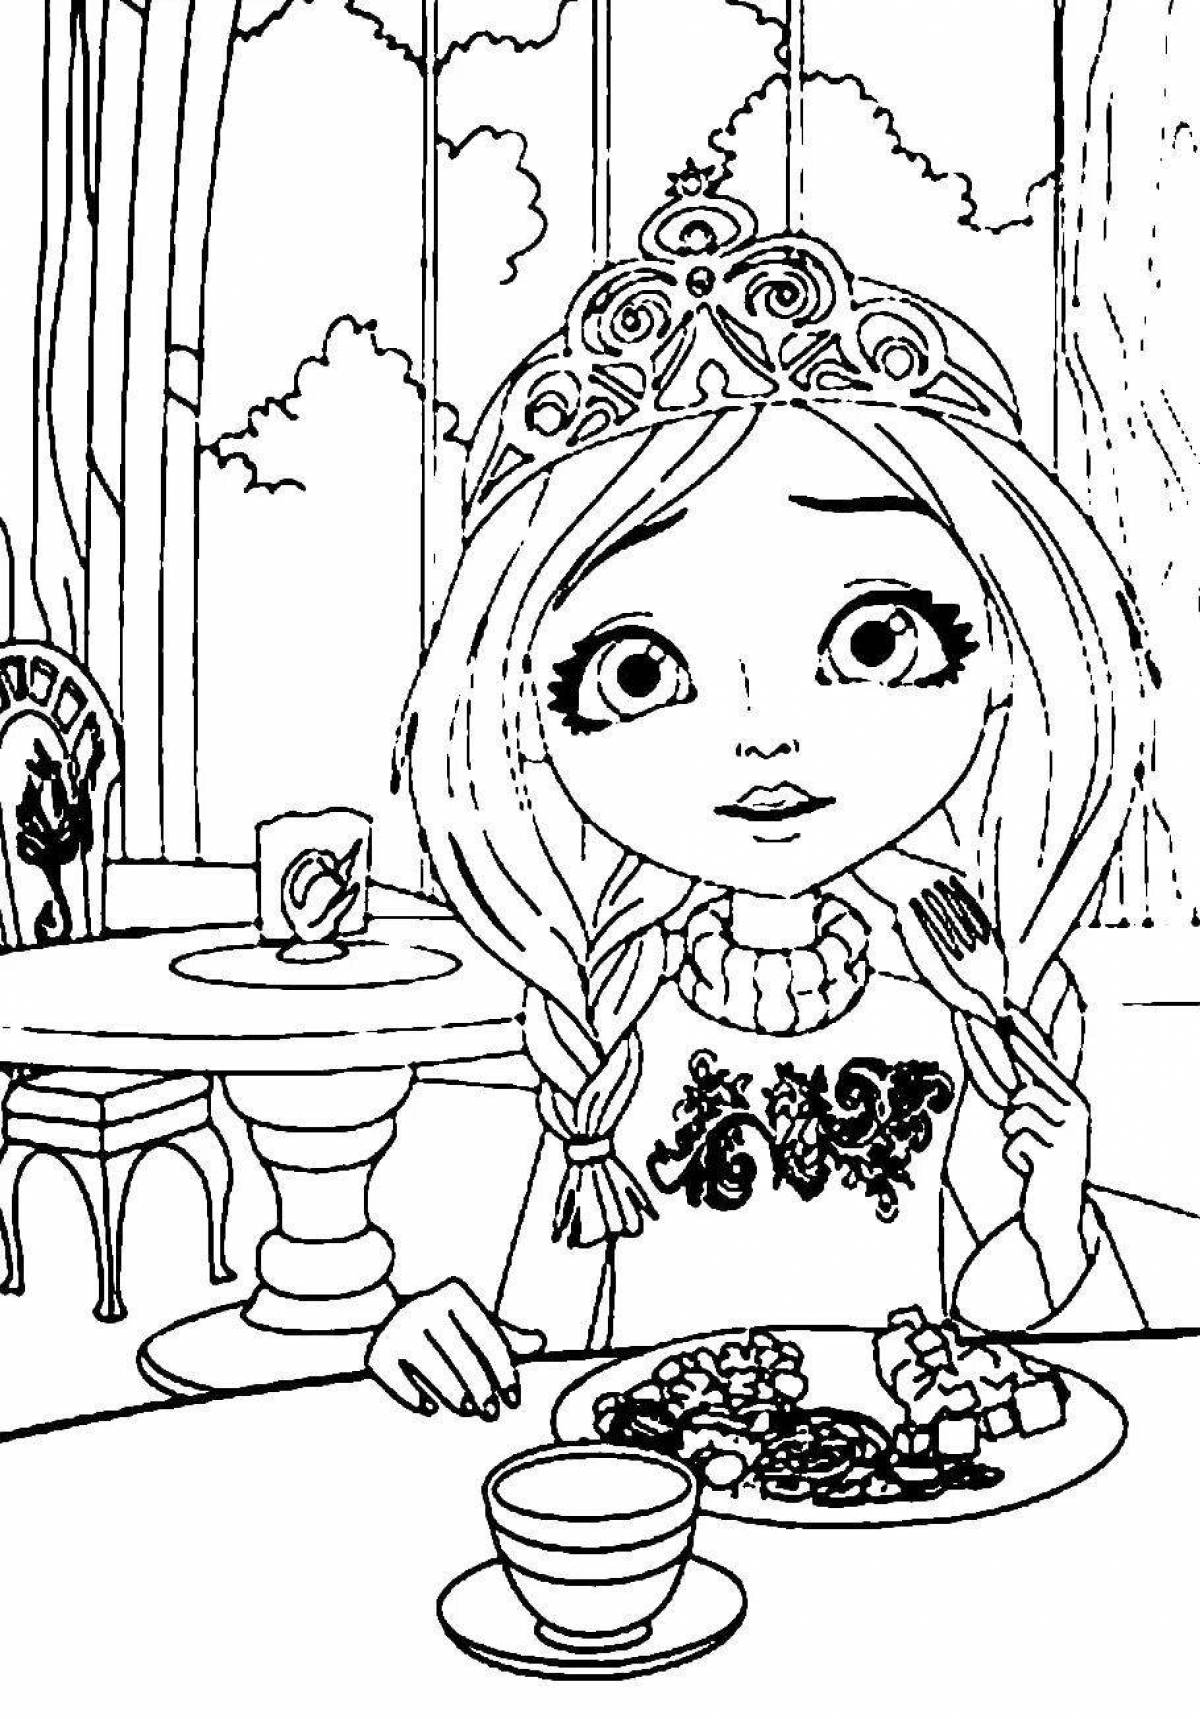 Merry princesses are preparing coloring pages